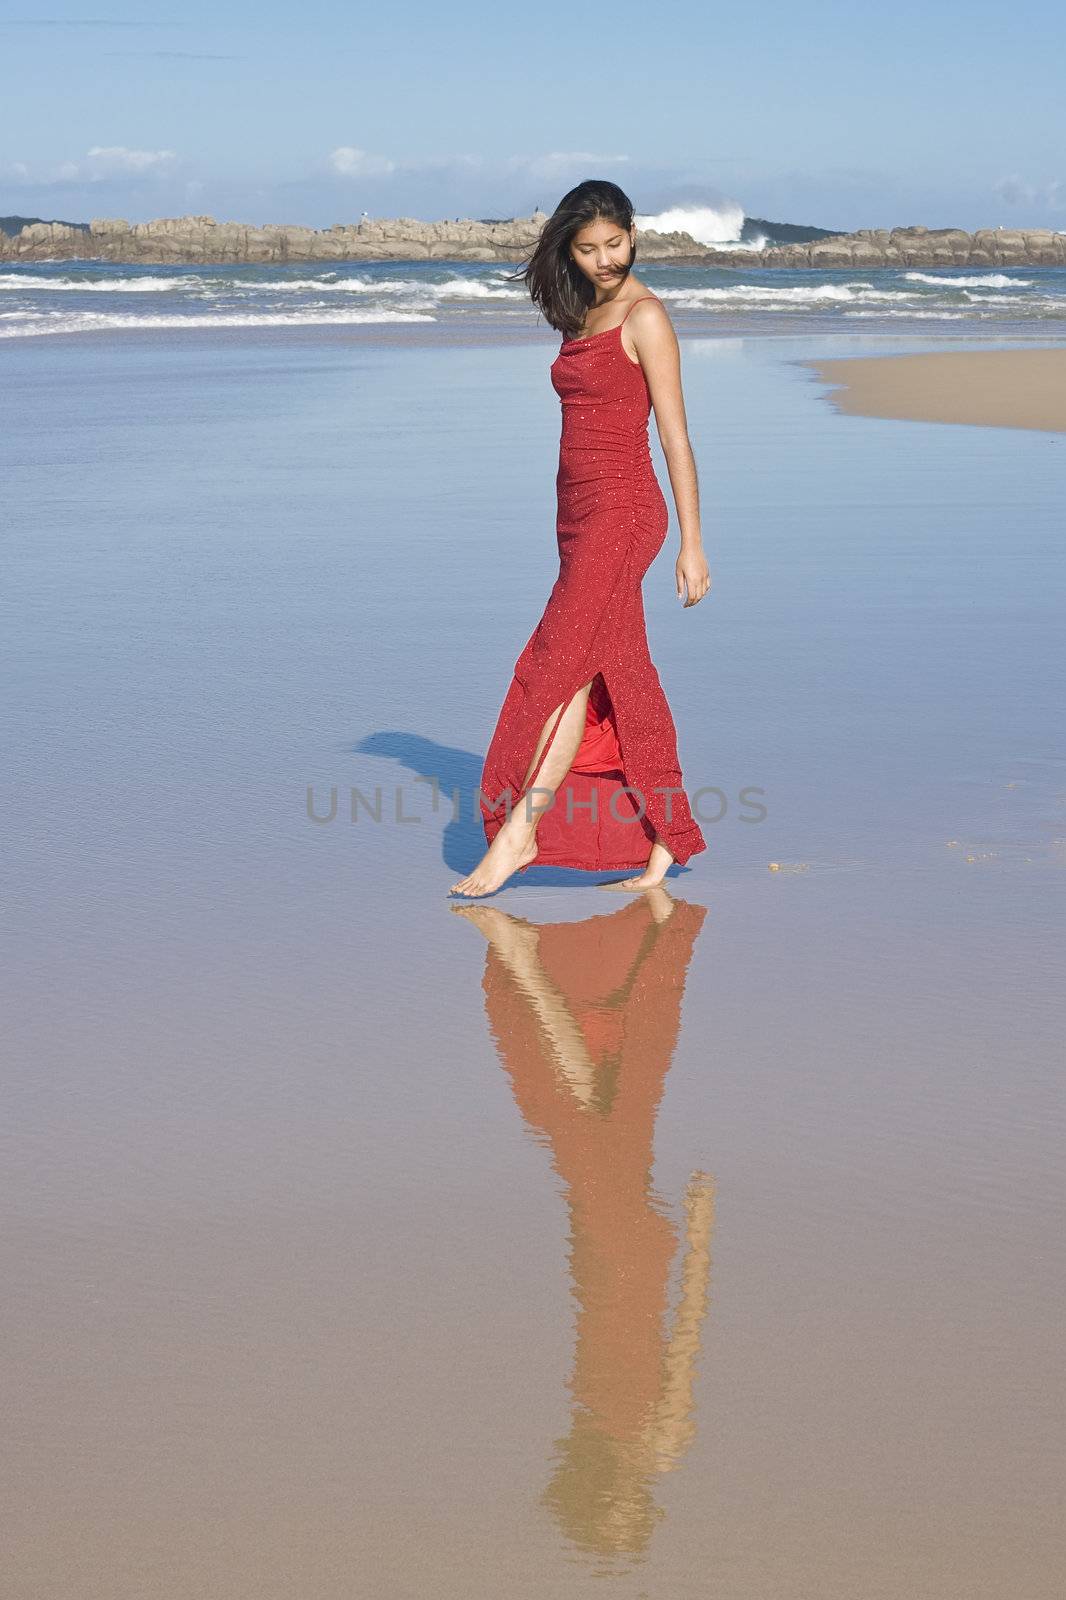 Lady in red dress walking at the beach